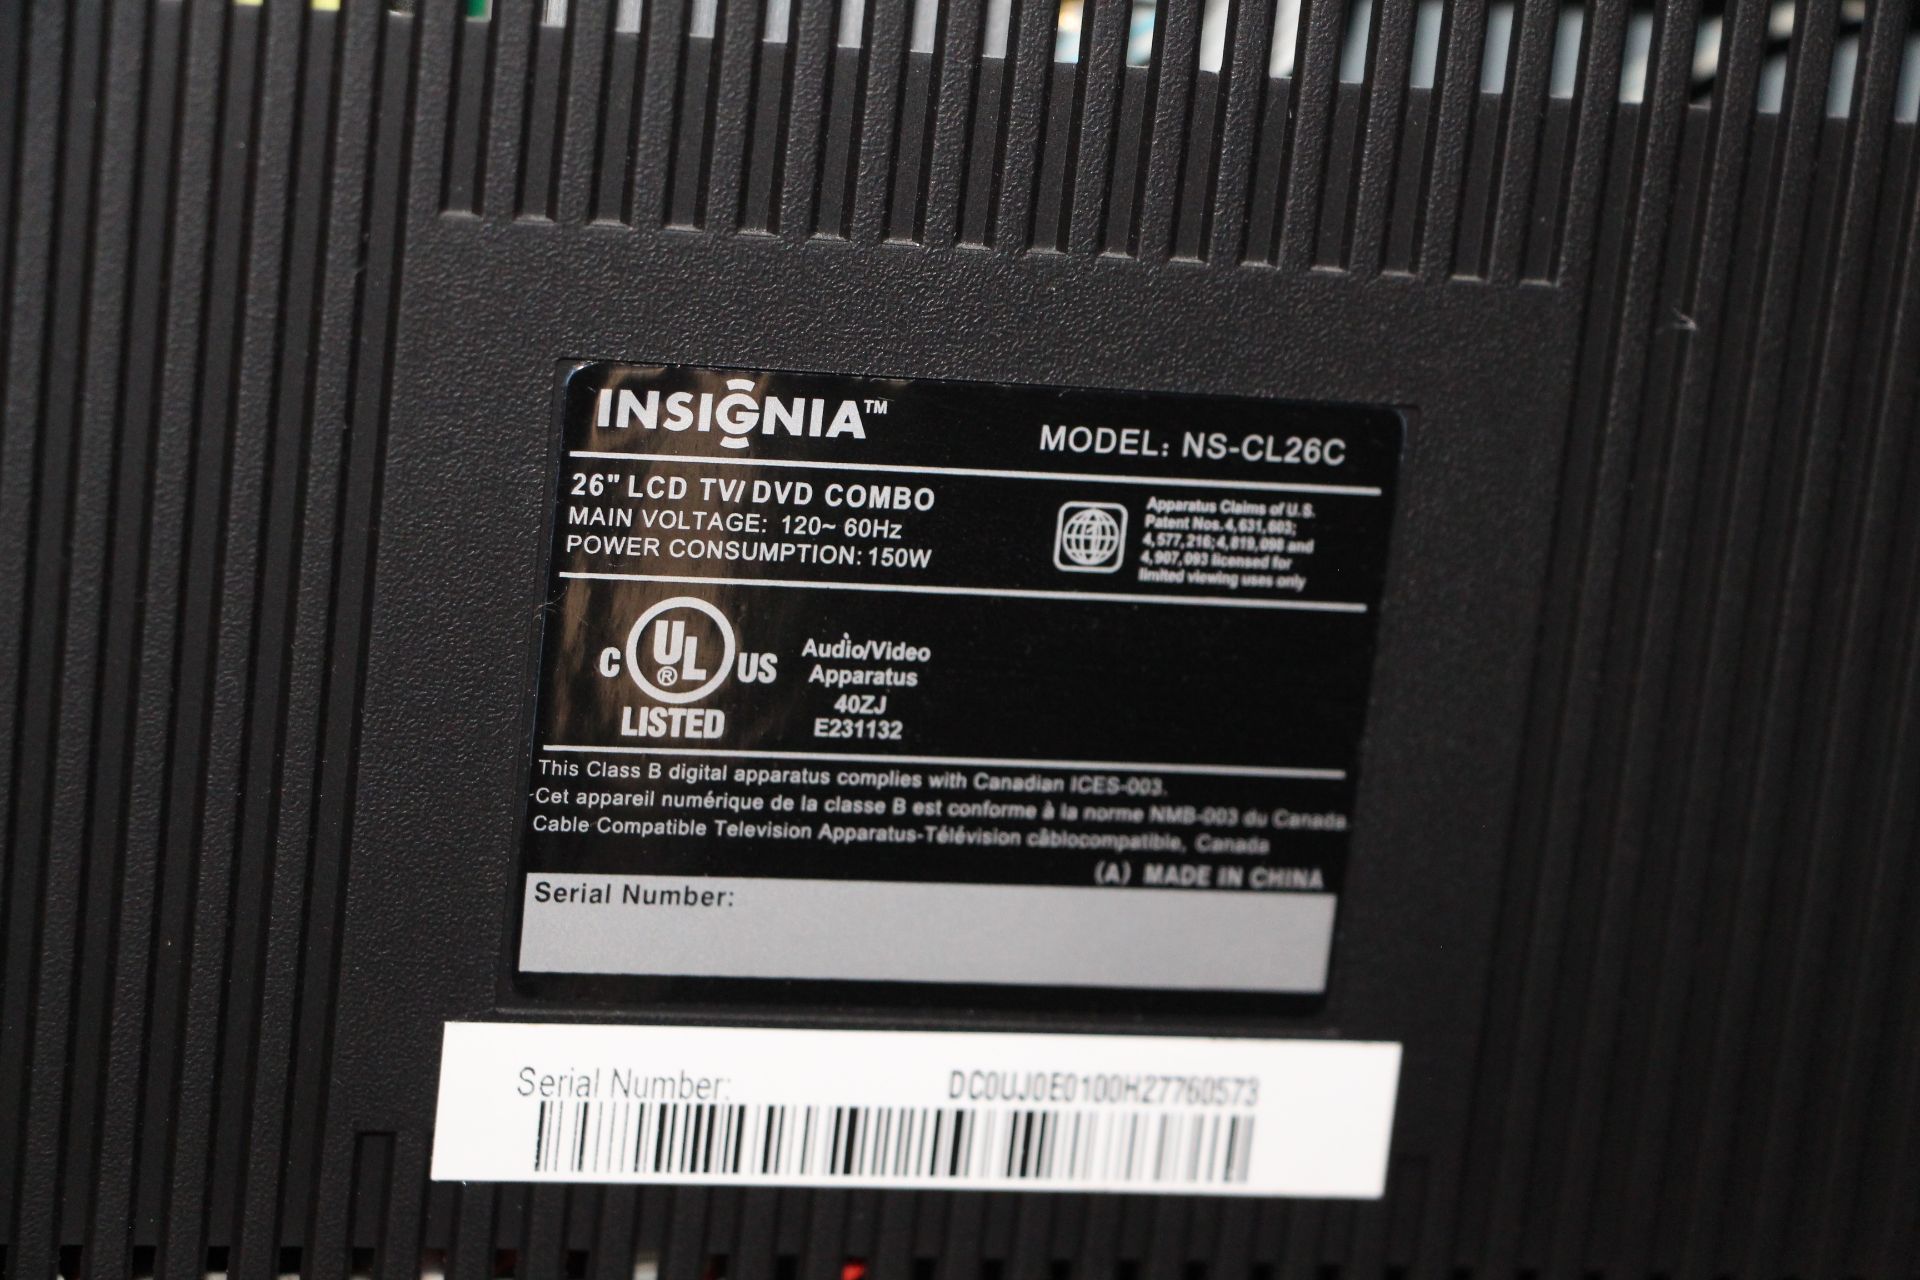 Insignia 26" LCD TV - Image 2 of 2